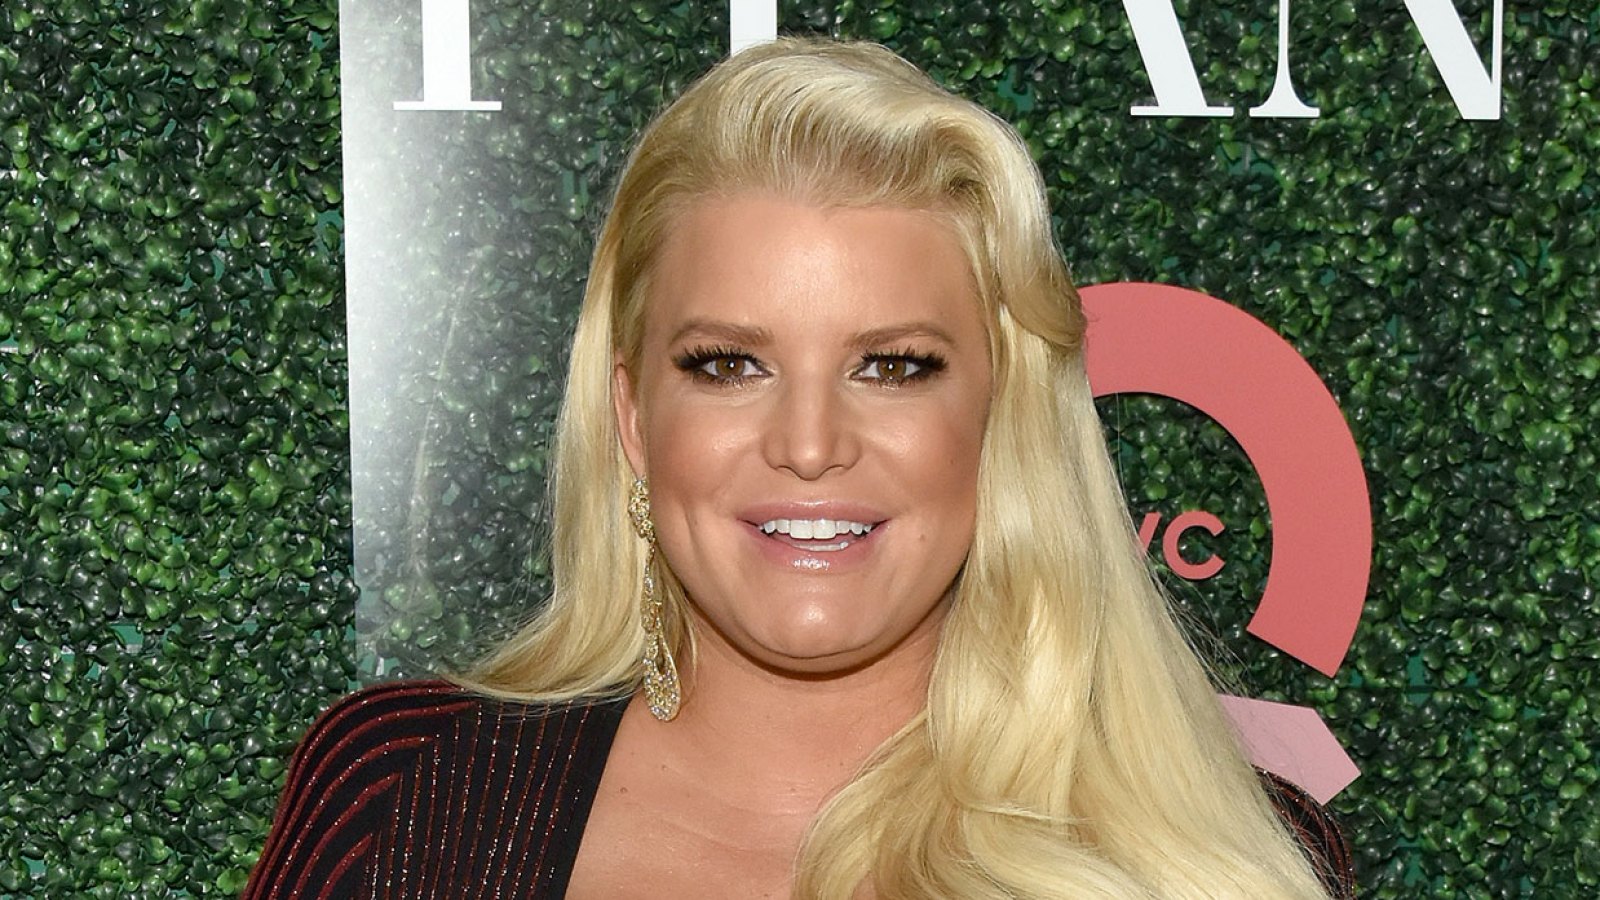 Jessica Simpson Shares Sweet Photo of Kids: ‘The Only Thing Getting Me Through This Pregnancy’